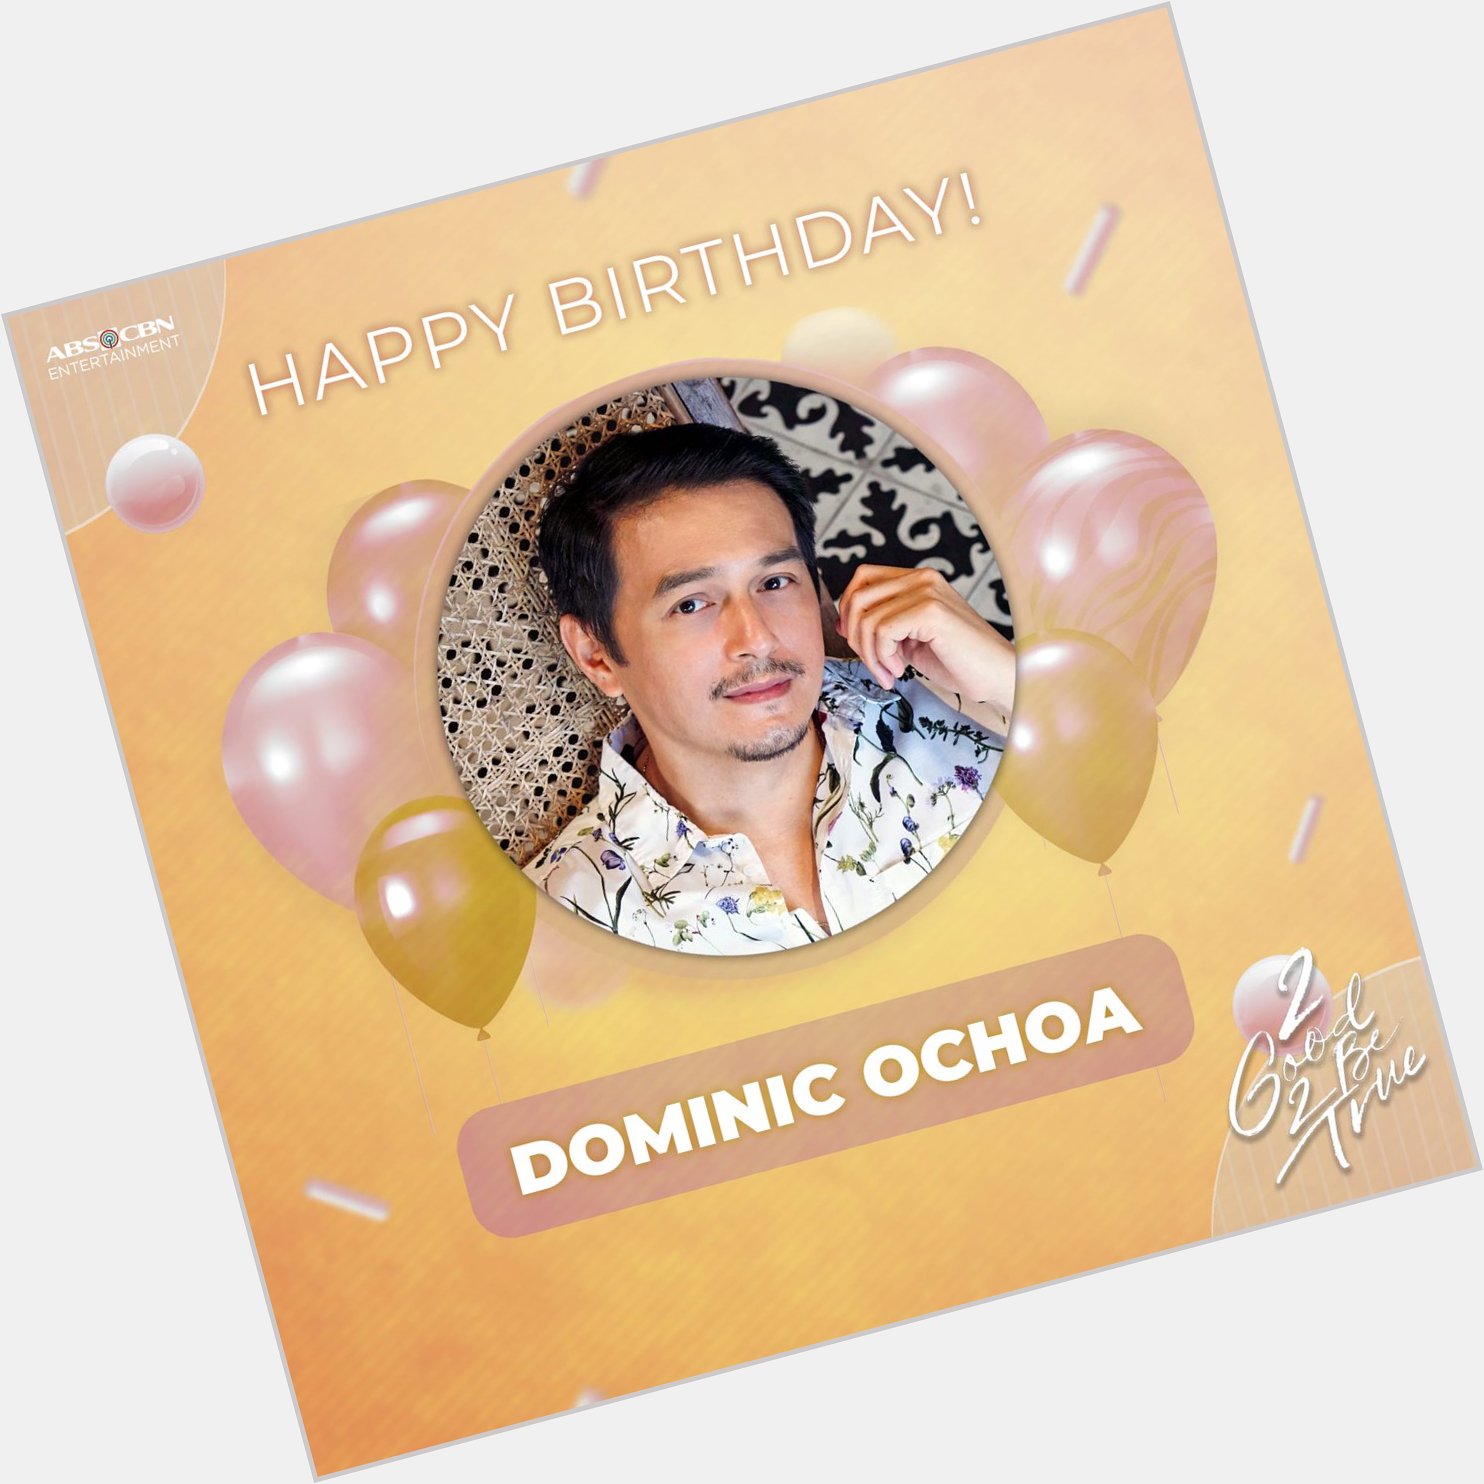 Happy Birthday, Dominic Ochoa. Stay safe and God bless you always! Love from your Family.    